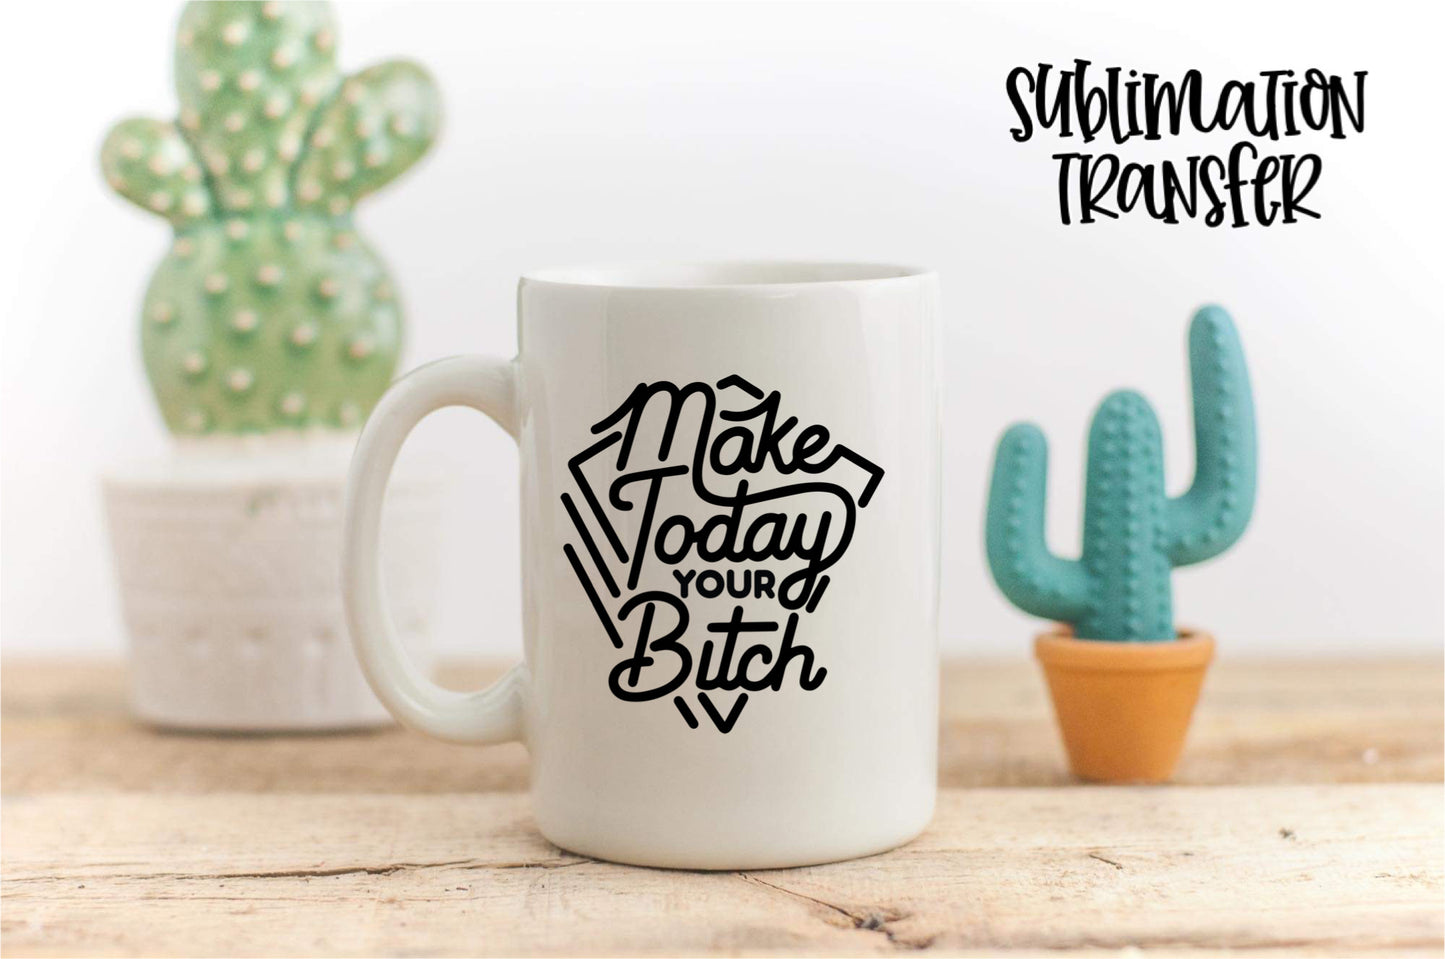 Make Today Your Bitch - SUBLIMATION TRANSFER